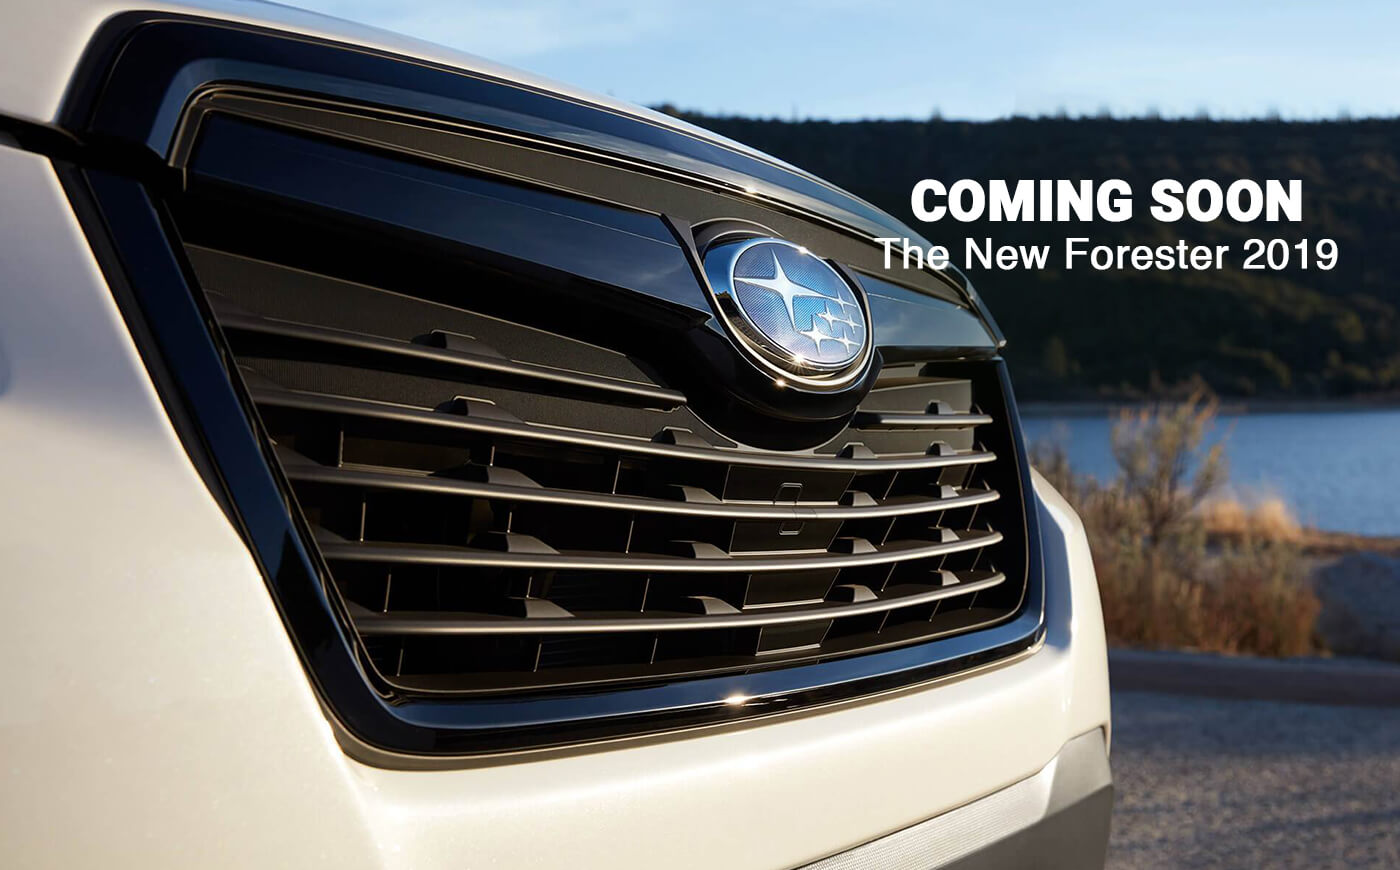 The New Forester